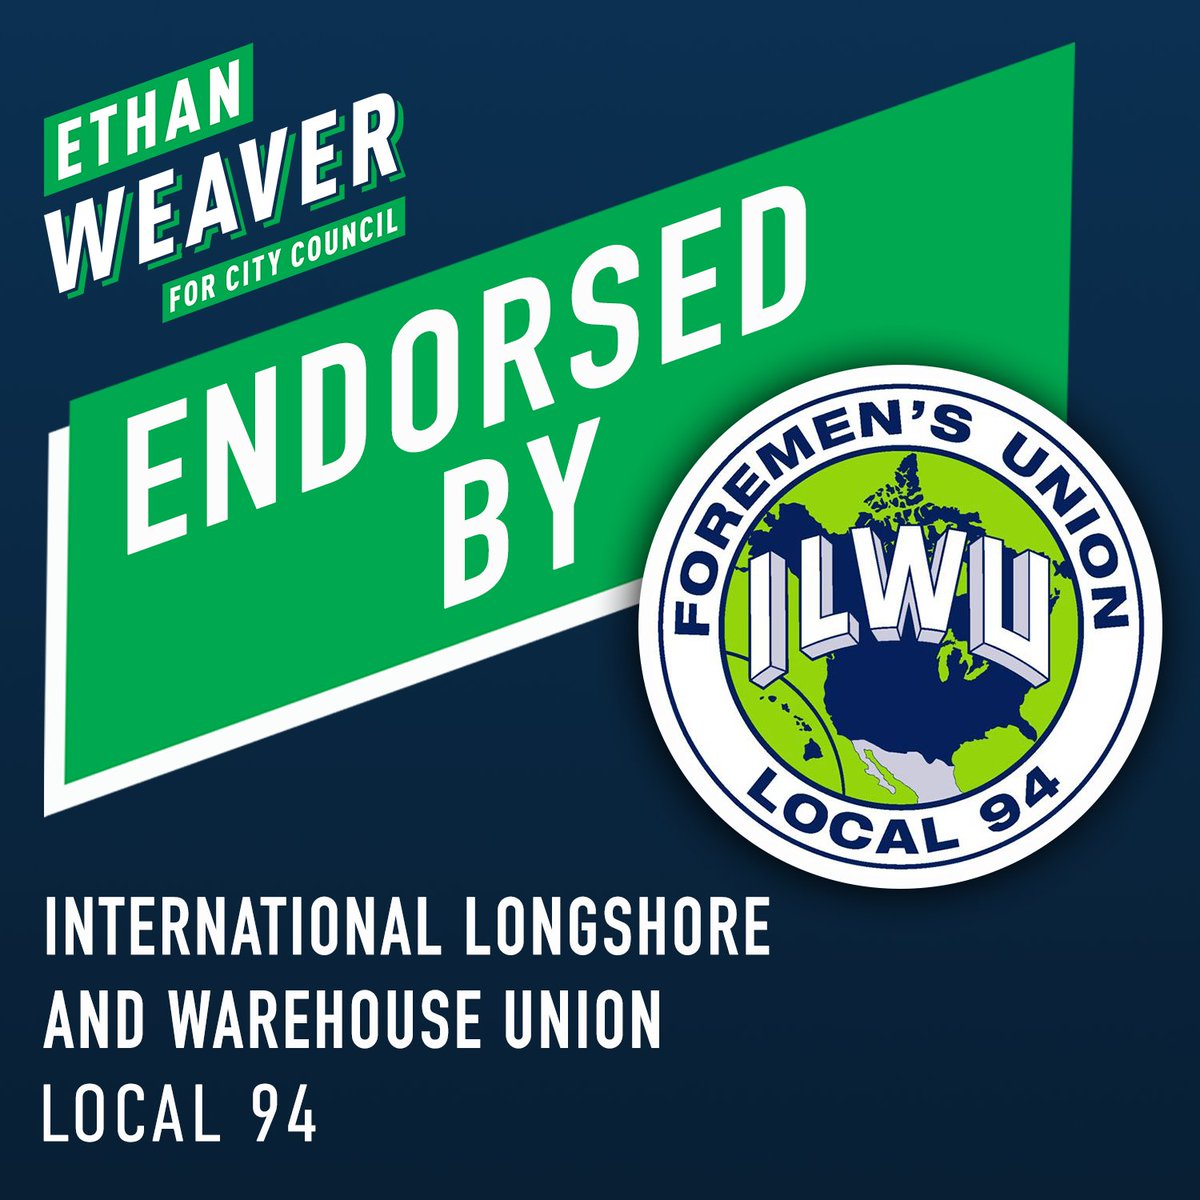 I'm honored to have the support of the hardworking members of ILWU Local 94. Together, we'll fight for good-paying, union jobs at our ports to help build a Los Angeles where every worker can thrive.